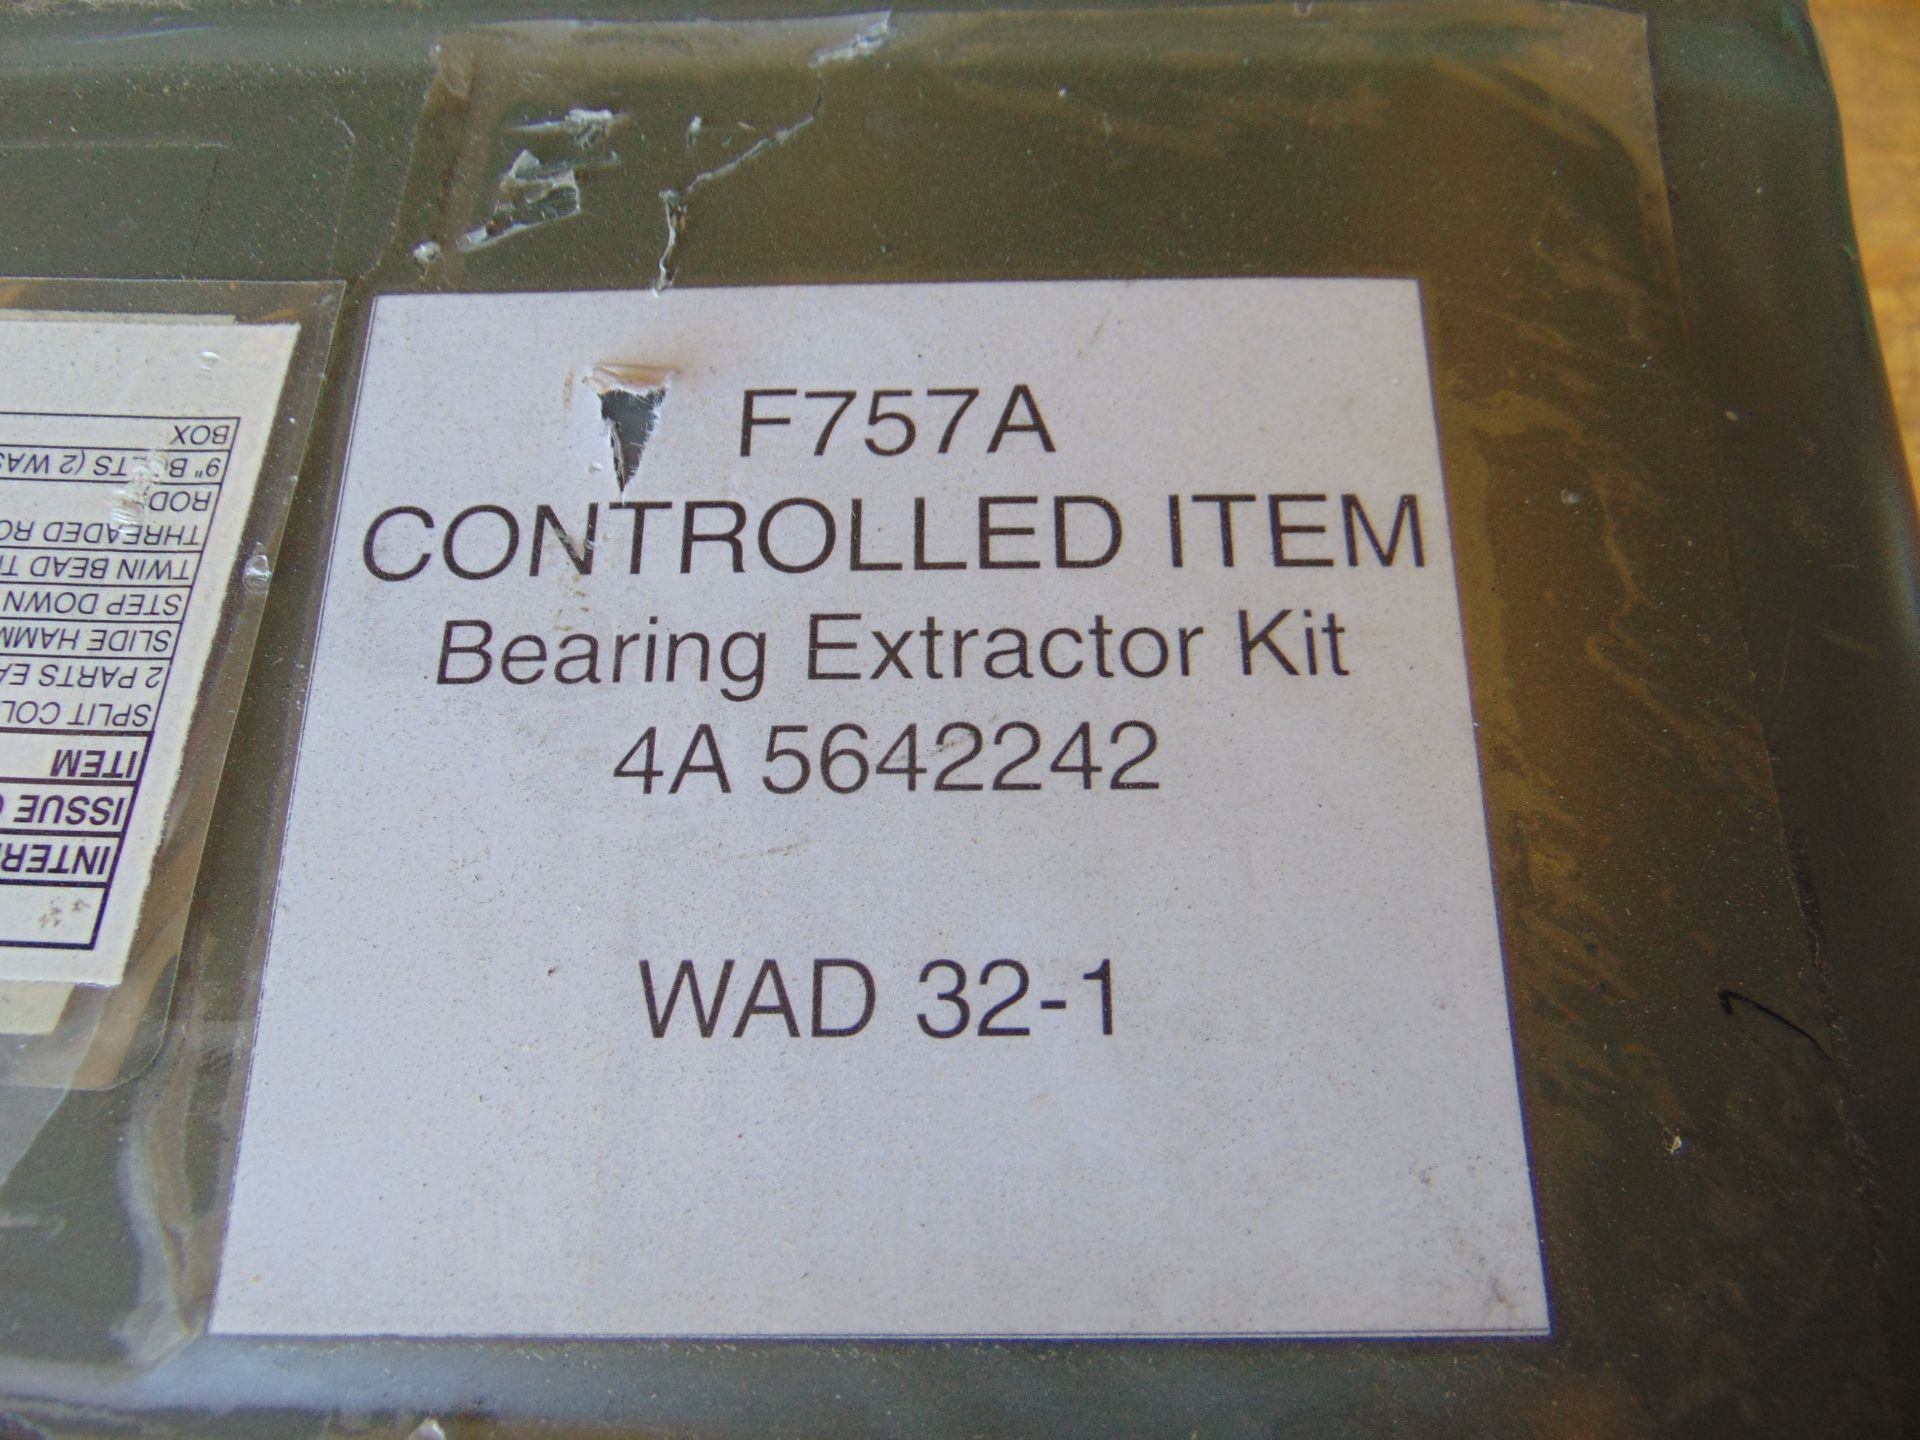 Bearing Extractor Kit in Transit Case with Serviceable Label - Image 4 of 8